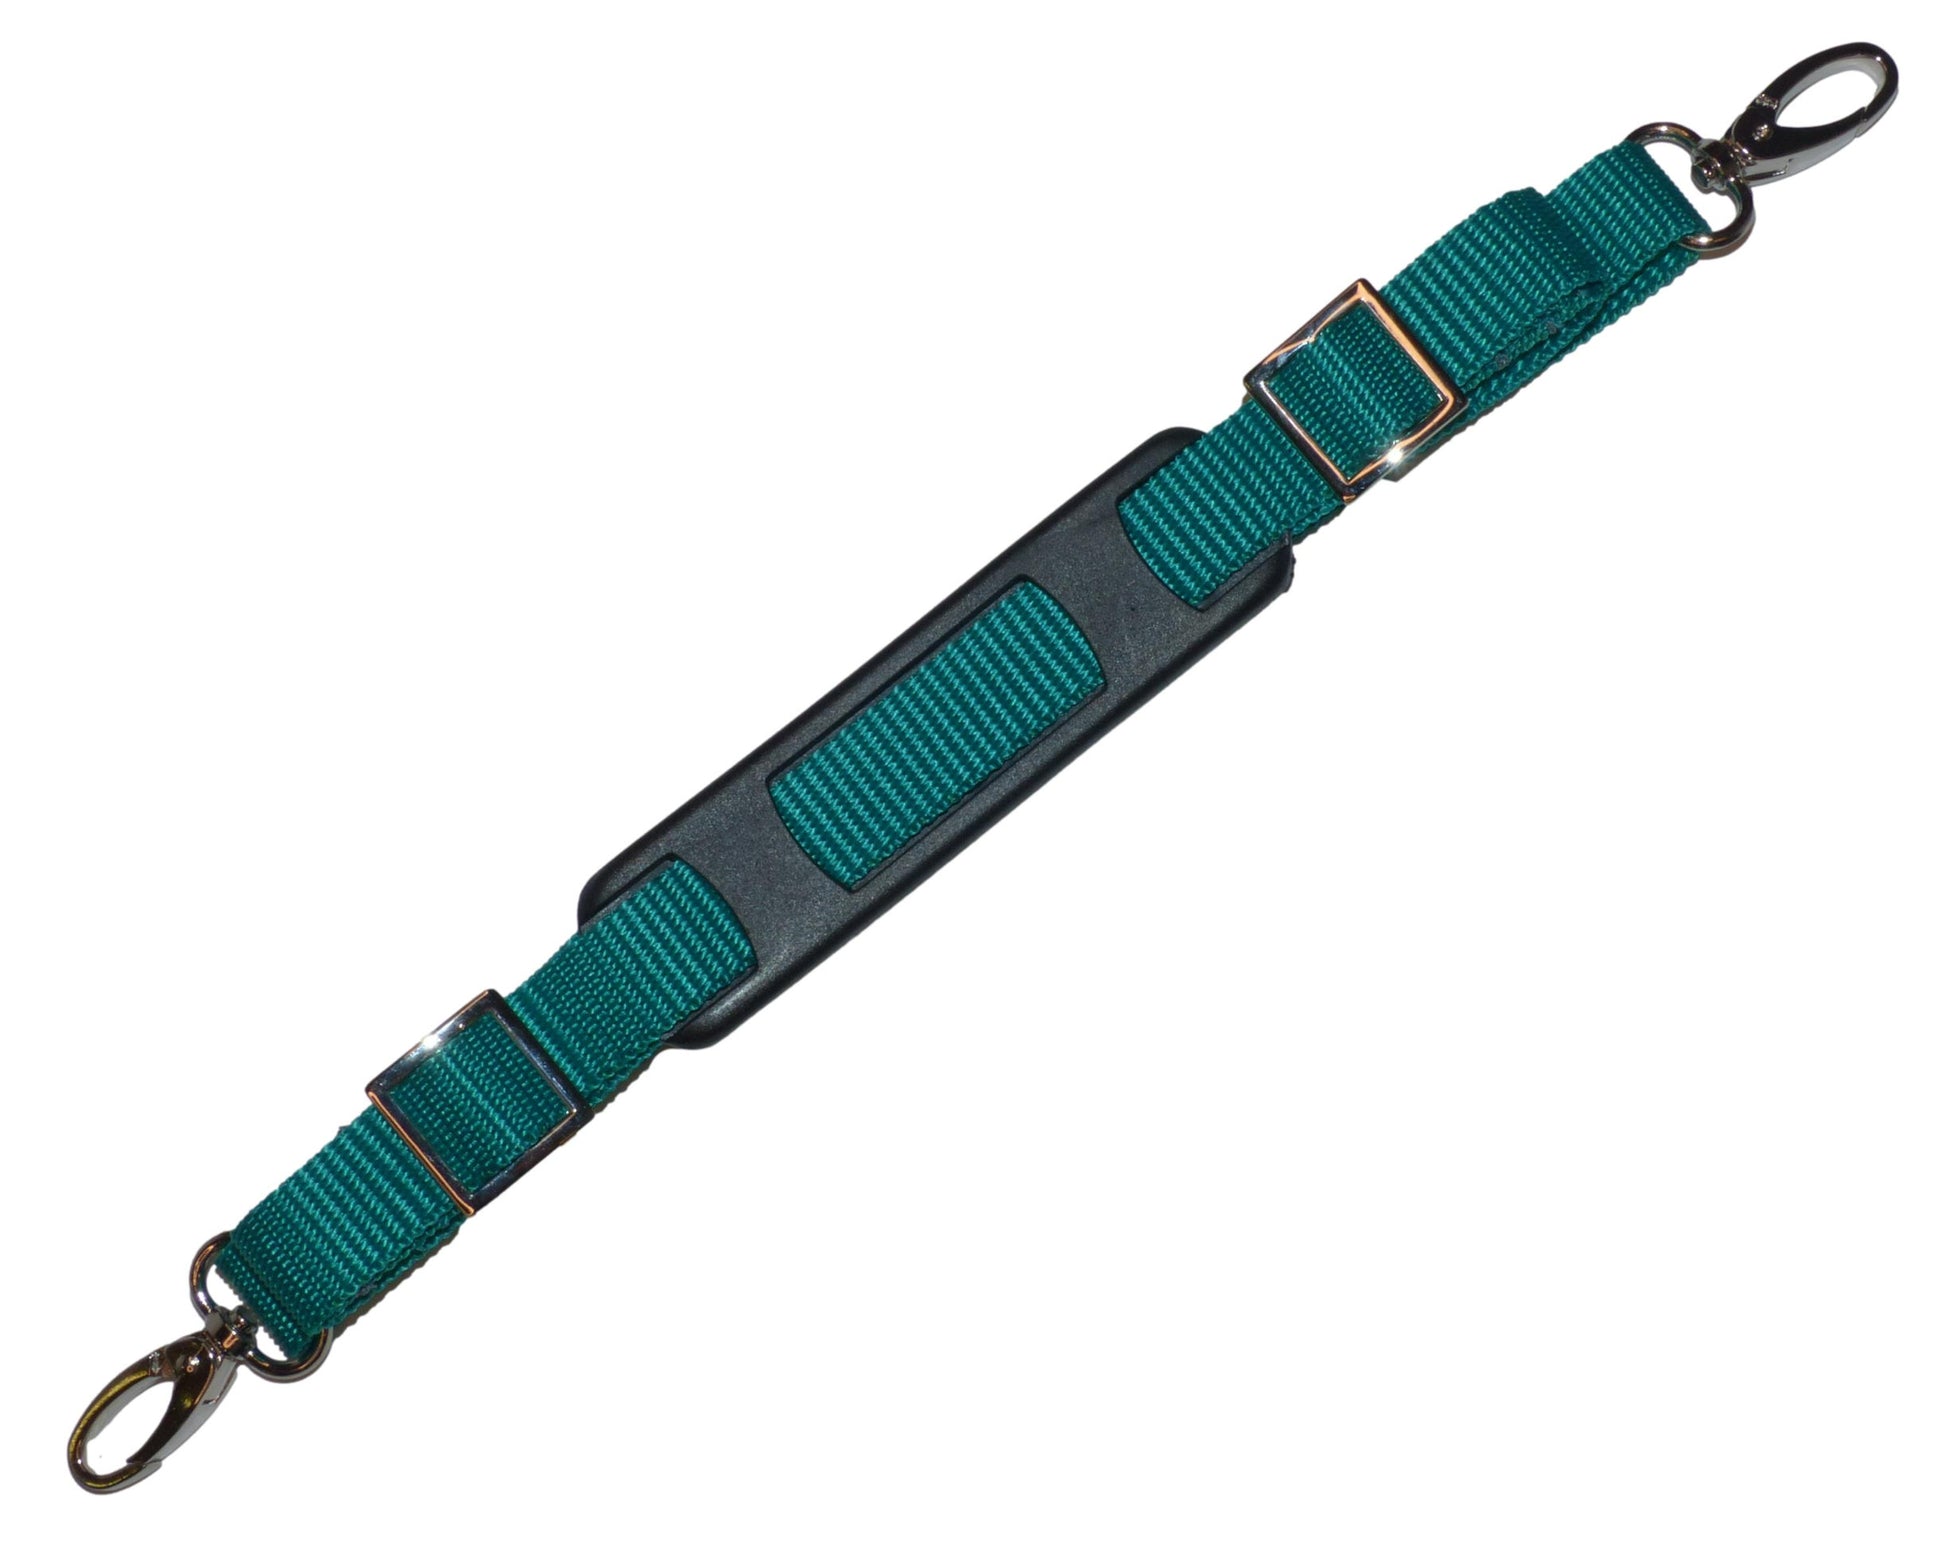 Benristraps 20mm Bag Strap with Metal Buckles and Shoulder Pad, 1 Metre in forest green